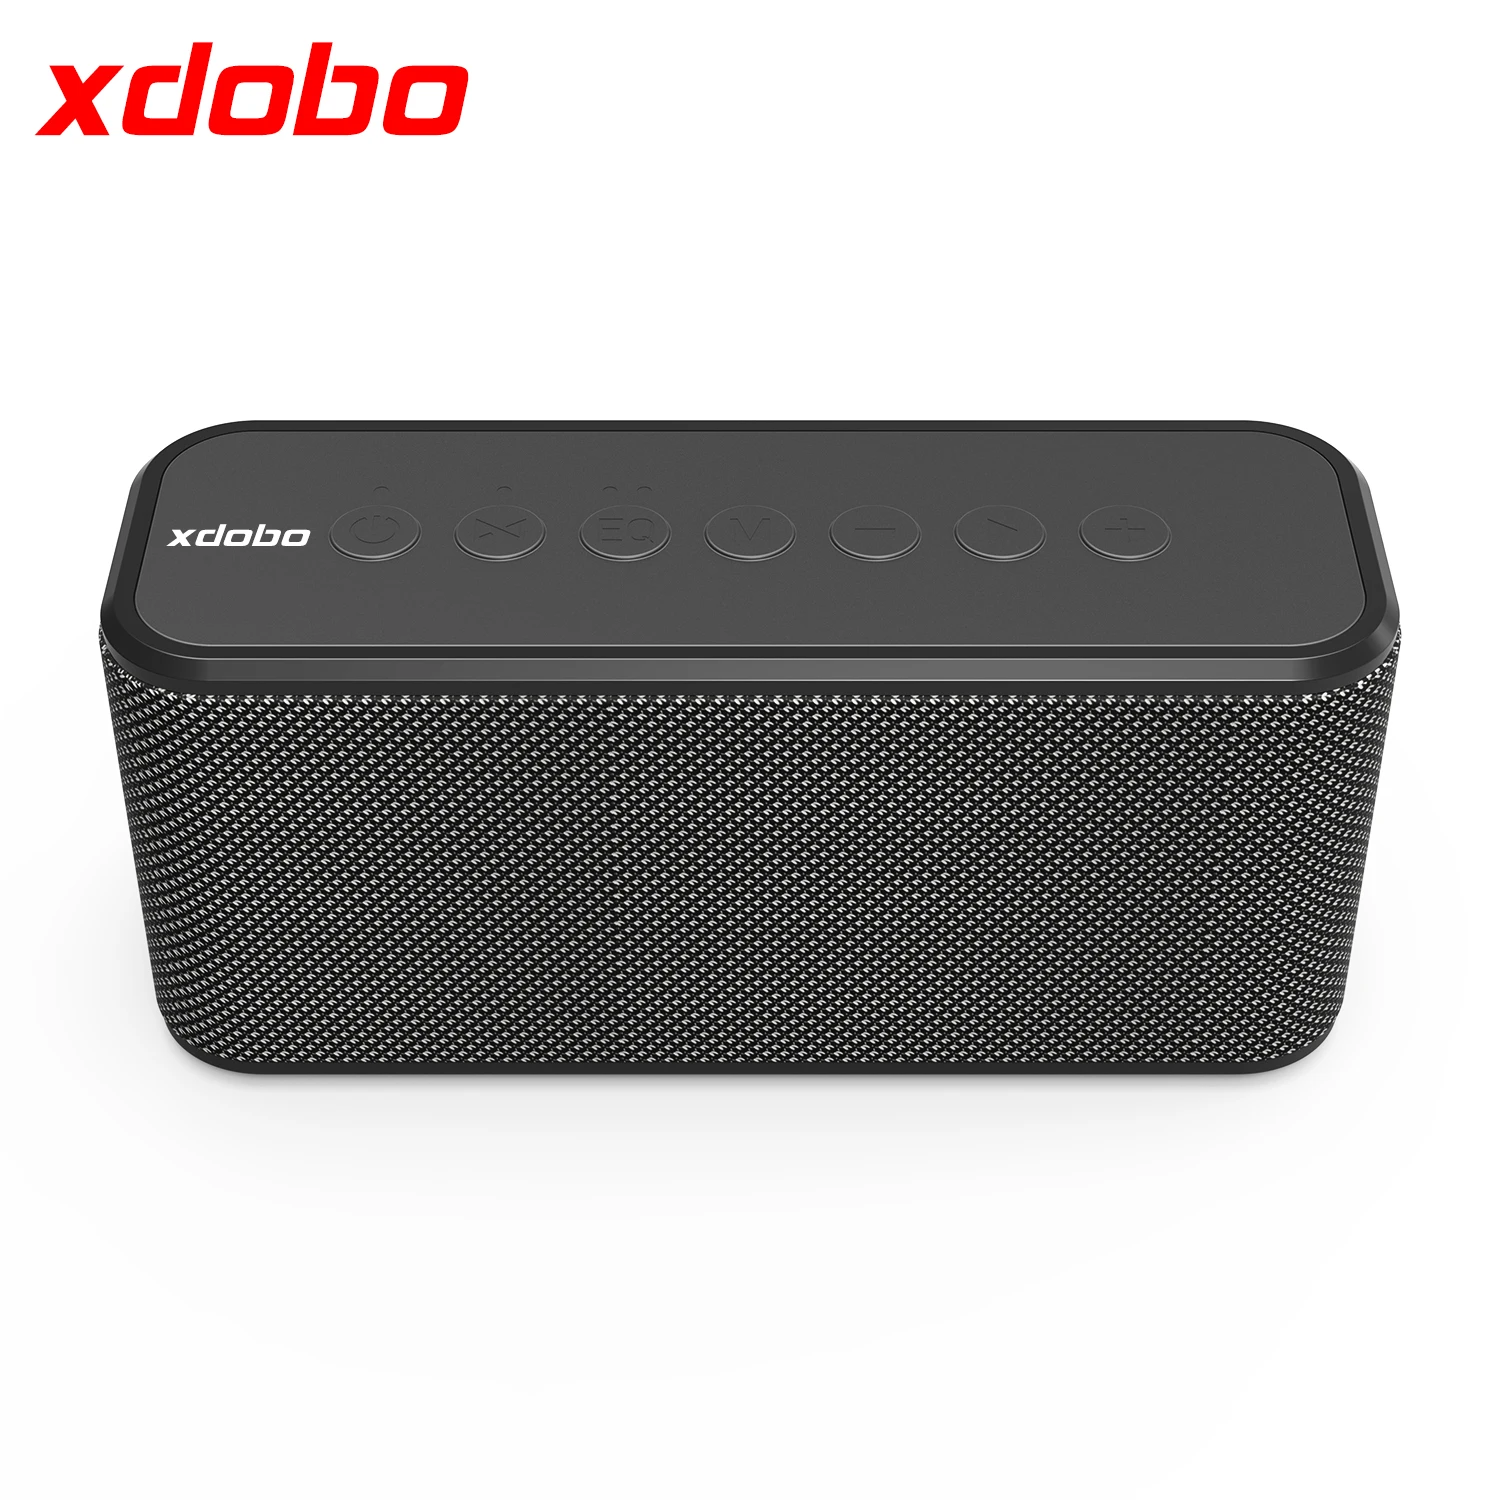 

80W XDOBO X8 PLUS Portable BT Speakers TWS Wireless Heavy Bass Boombox Music Player Subwoofer Column Support USB/TF/AUX